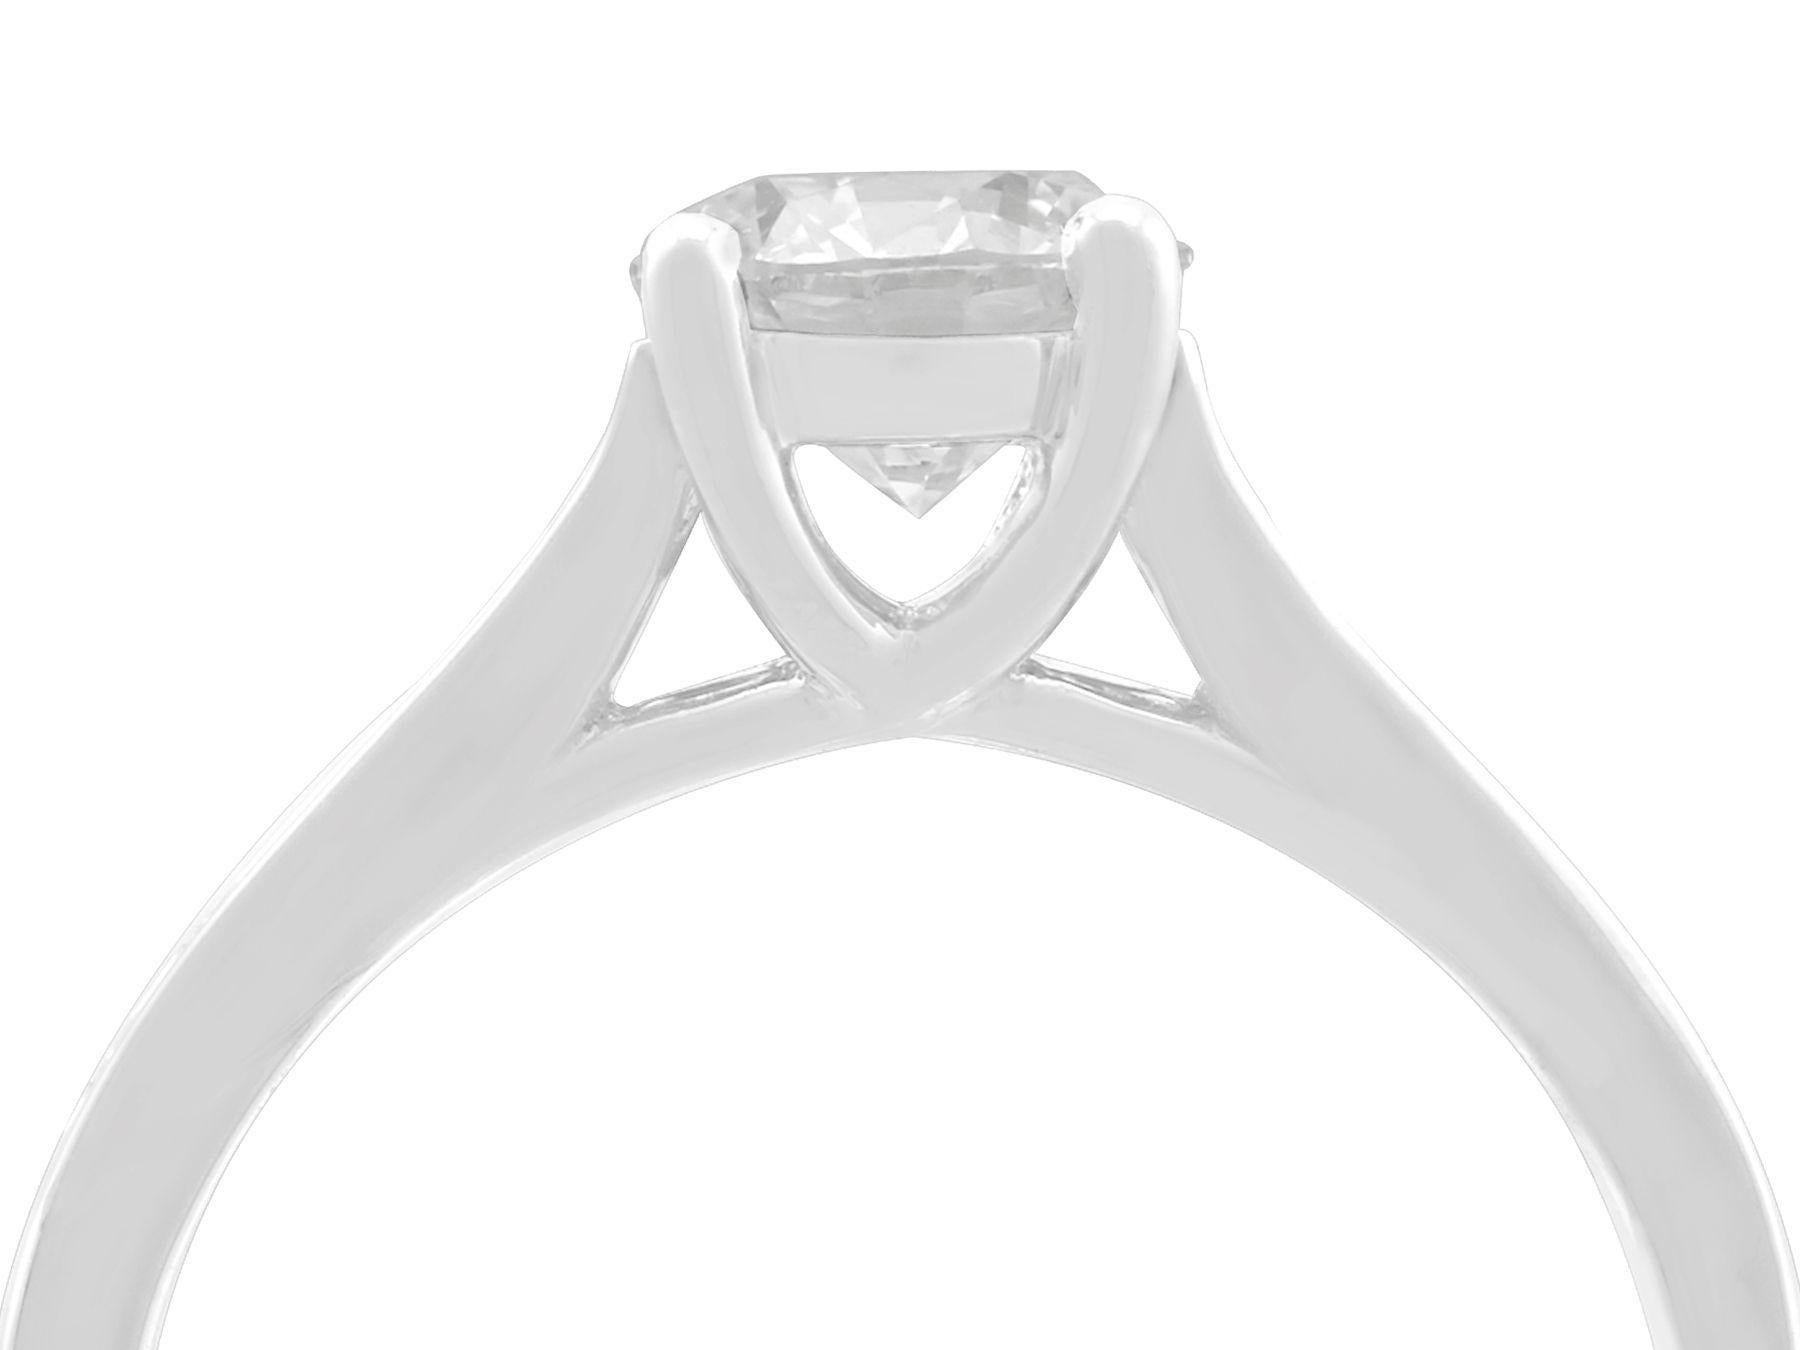 A fine and impressive contemporary 1.42 carat (total) modern brilliant round cut diamond solitaire ring in platinum; part of our diverse diamond jewelry/jewelry range.

This fine and impressive contemporary round cut diamond solitaire ring has been